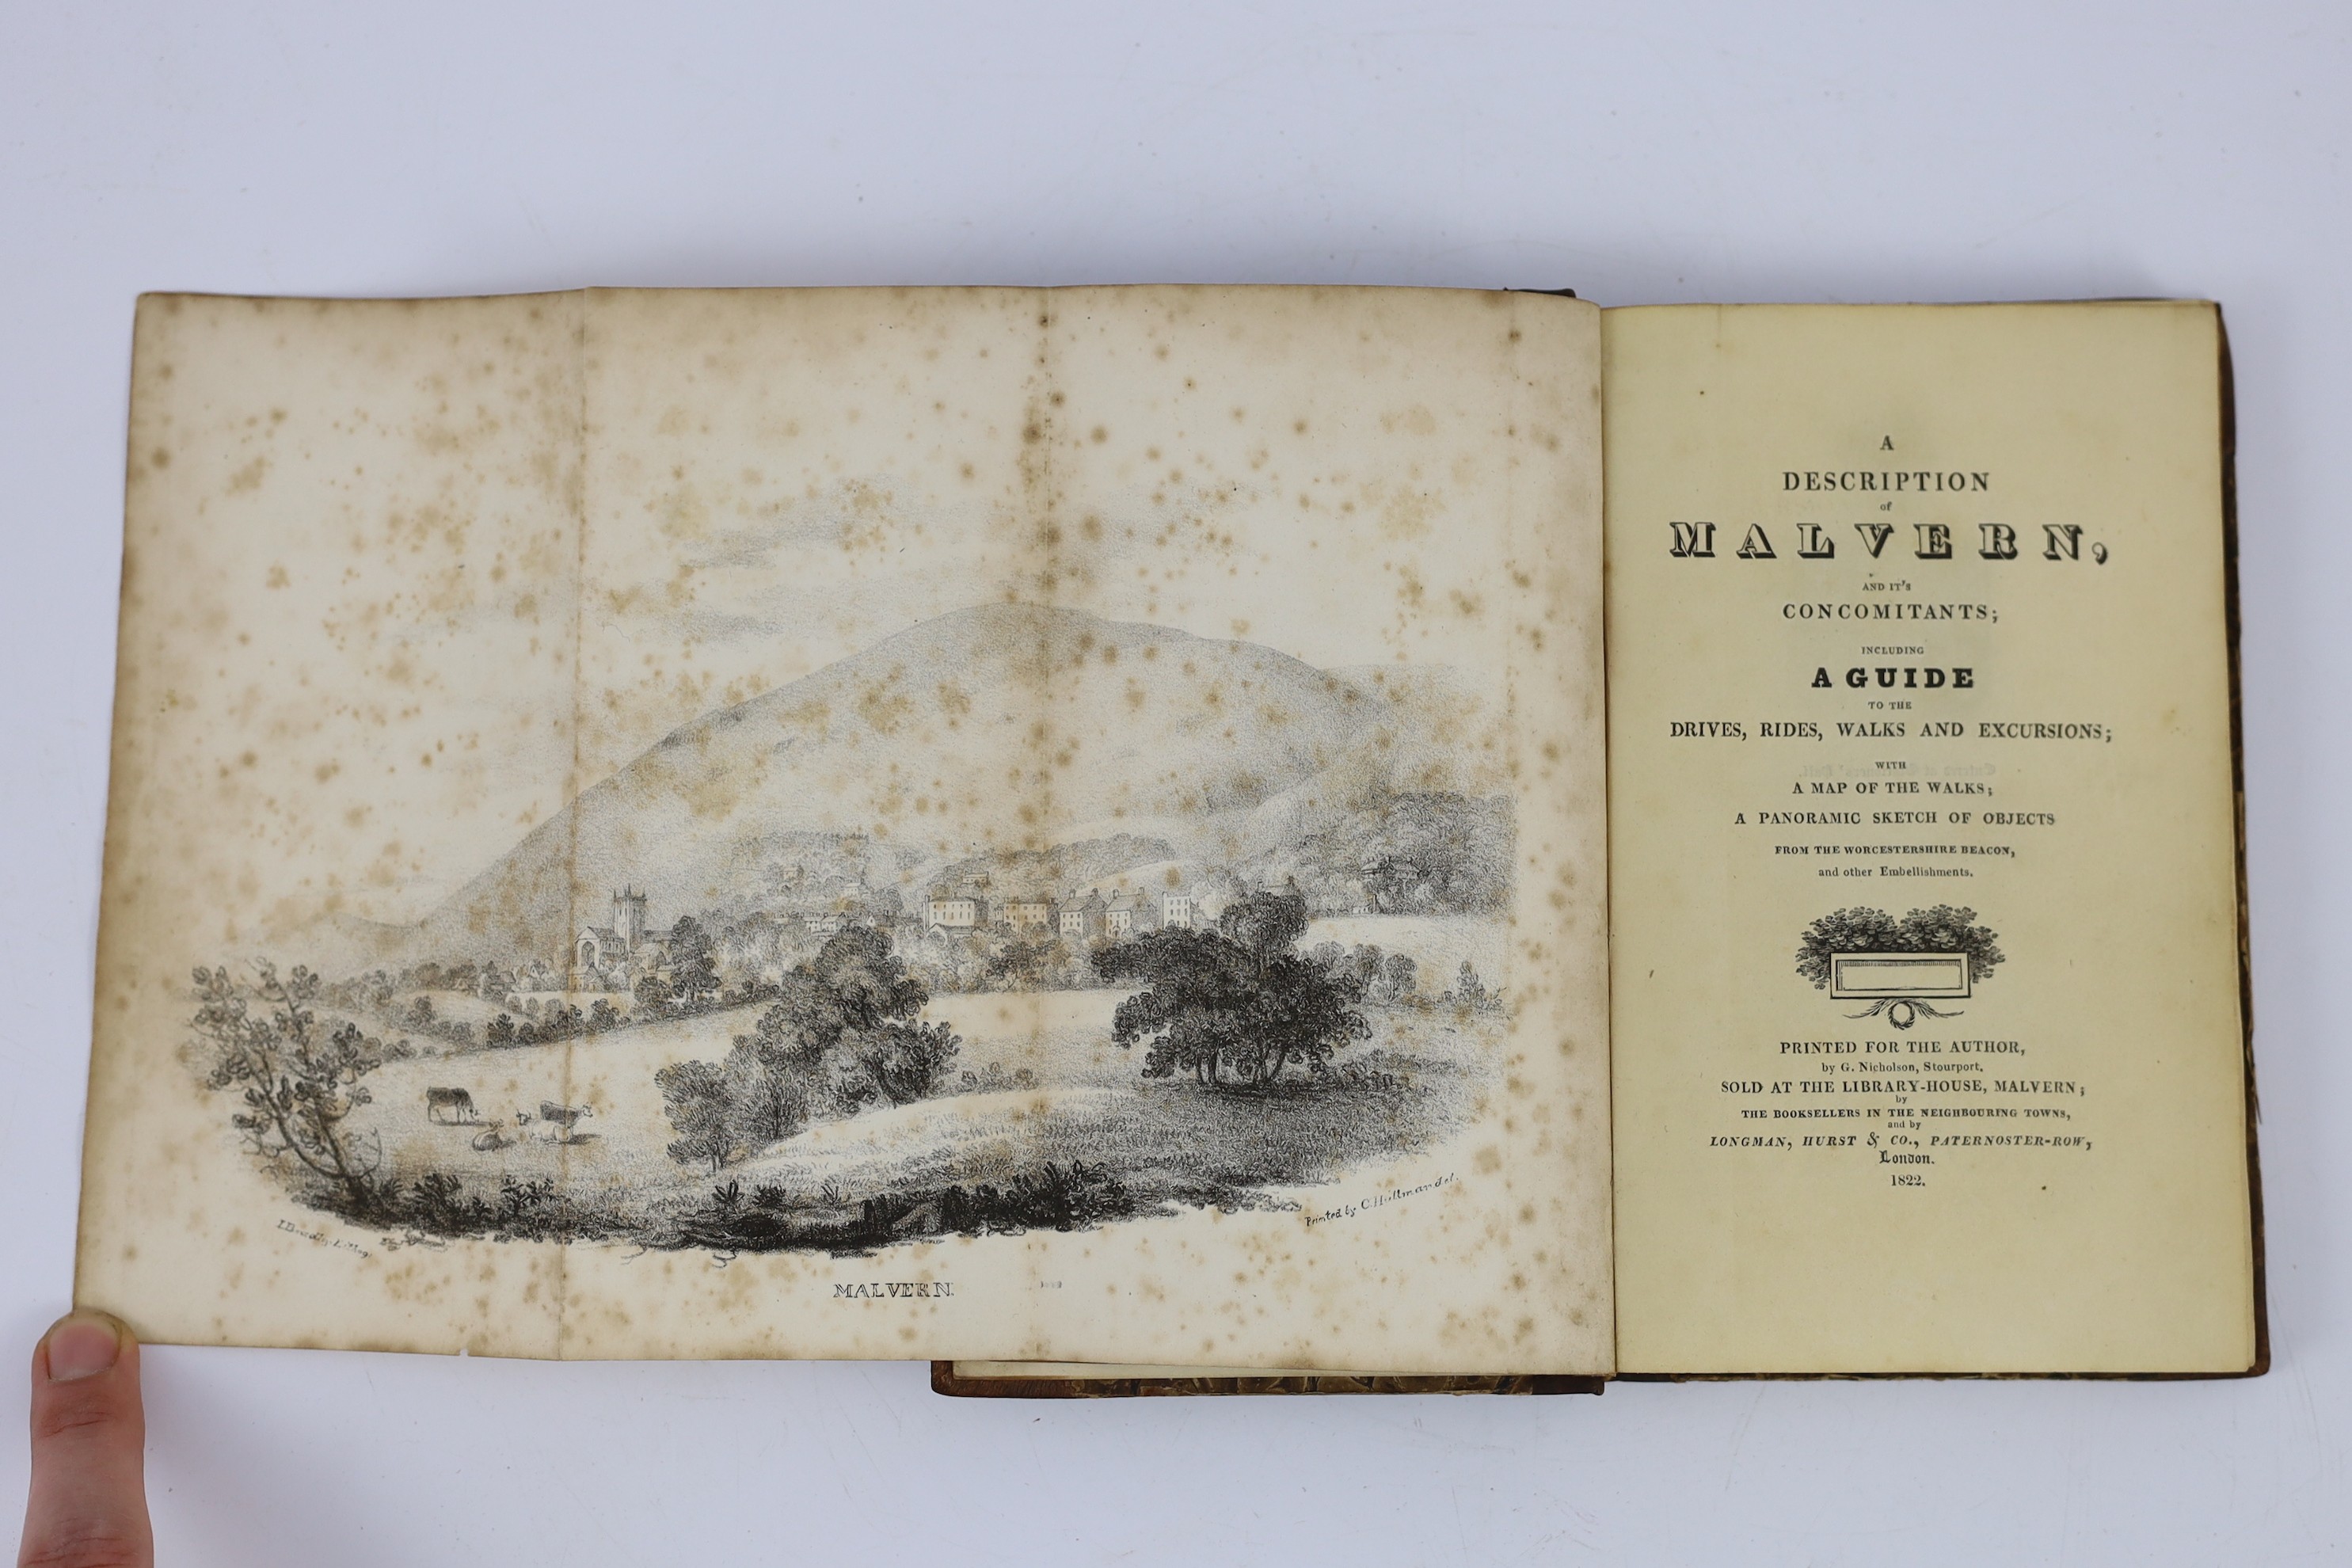 WORCS: (Southall, Mary) A Description of Malvern, and it's Concomitants; including a guide to the drives, rides, walks and excursions ... folded frontis., 5 lithographed plates, folded plan and folded map